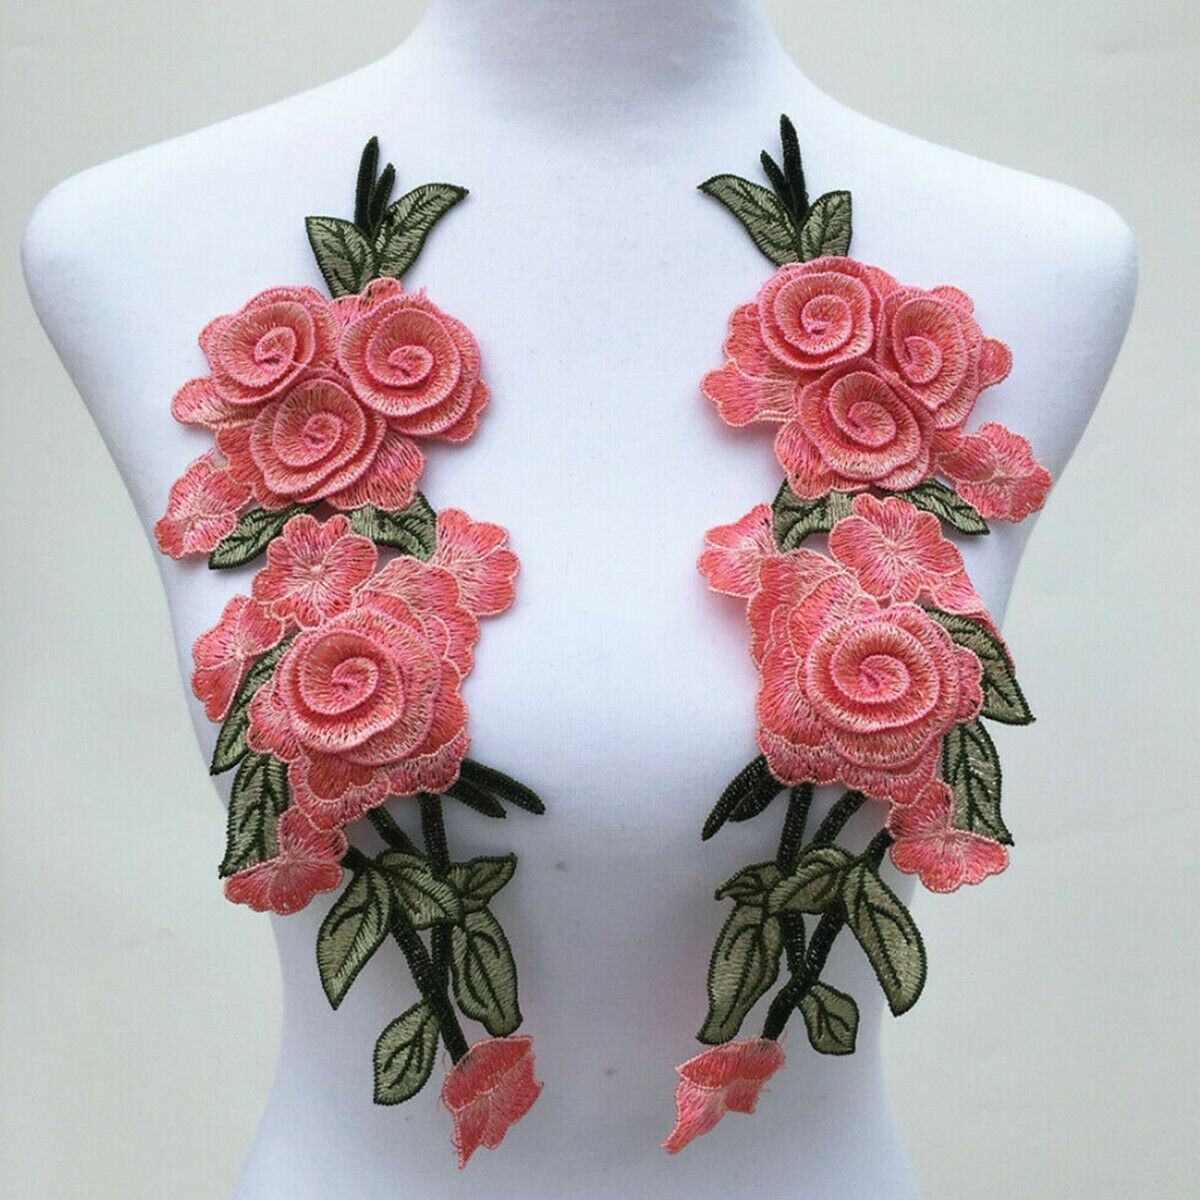 2 Pairs Rose Flower Embroidery Sew On Patch Cloth Floral Collar Garment Applique